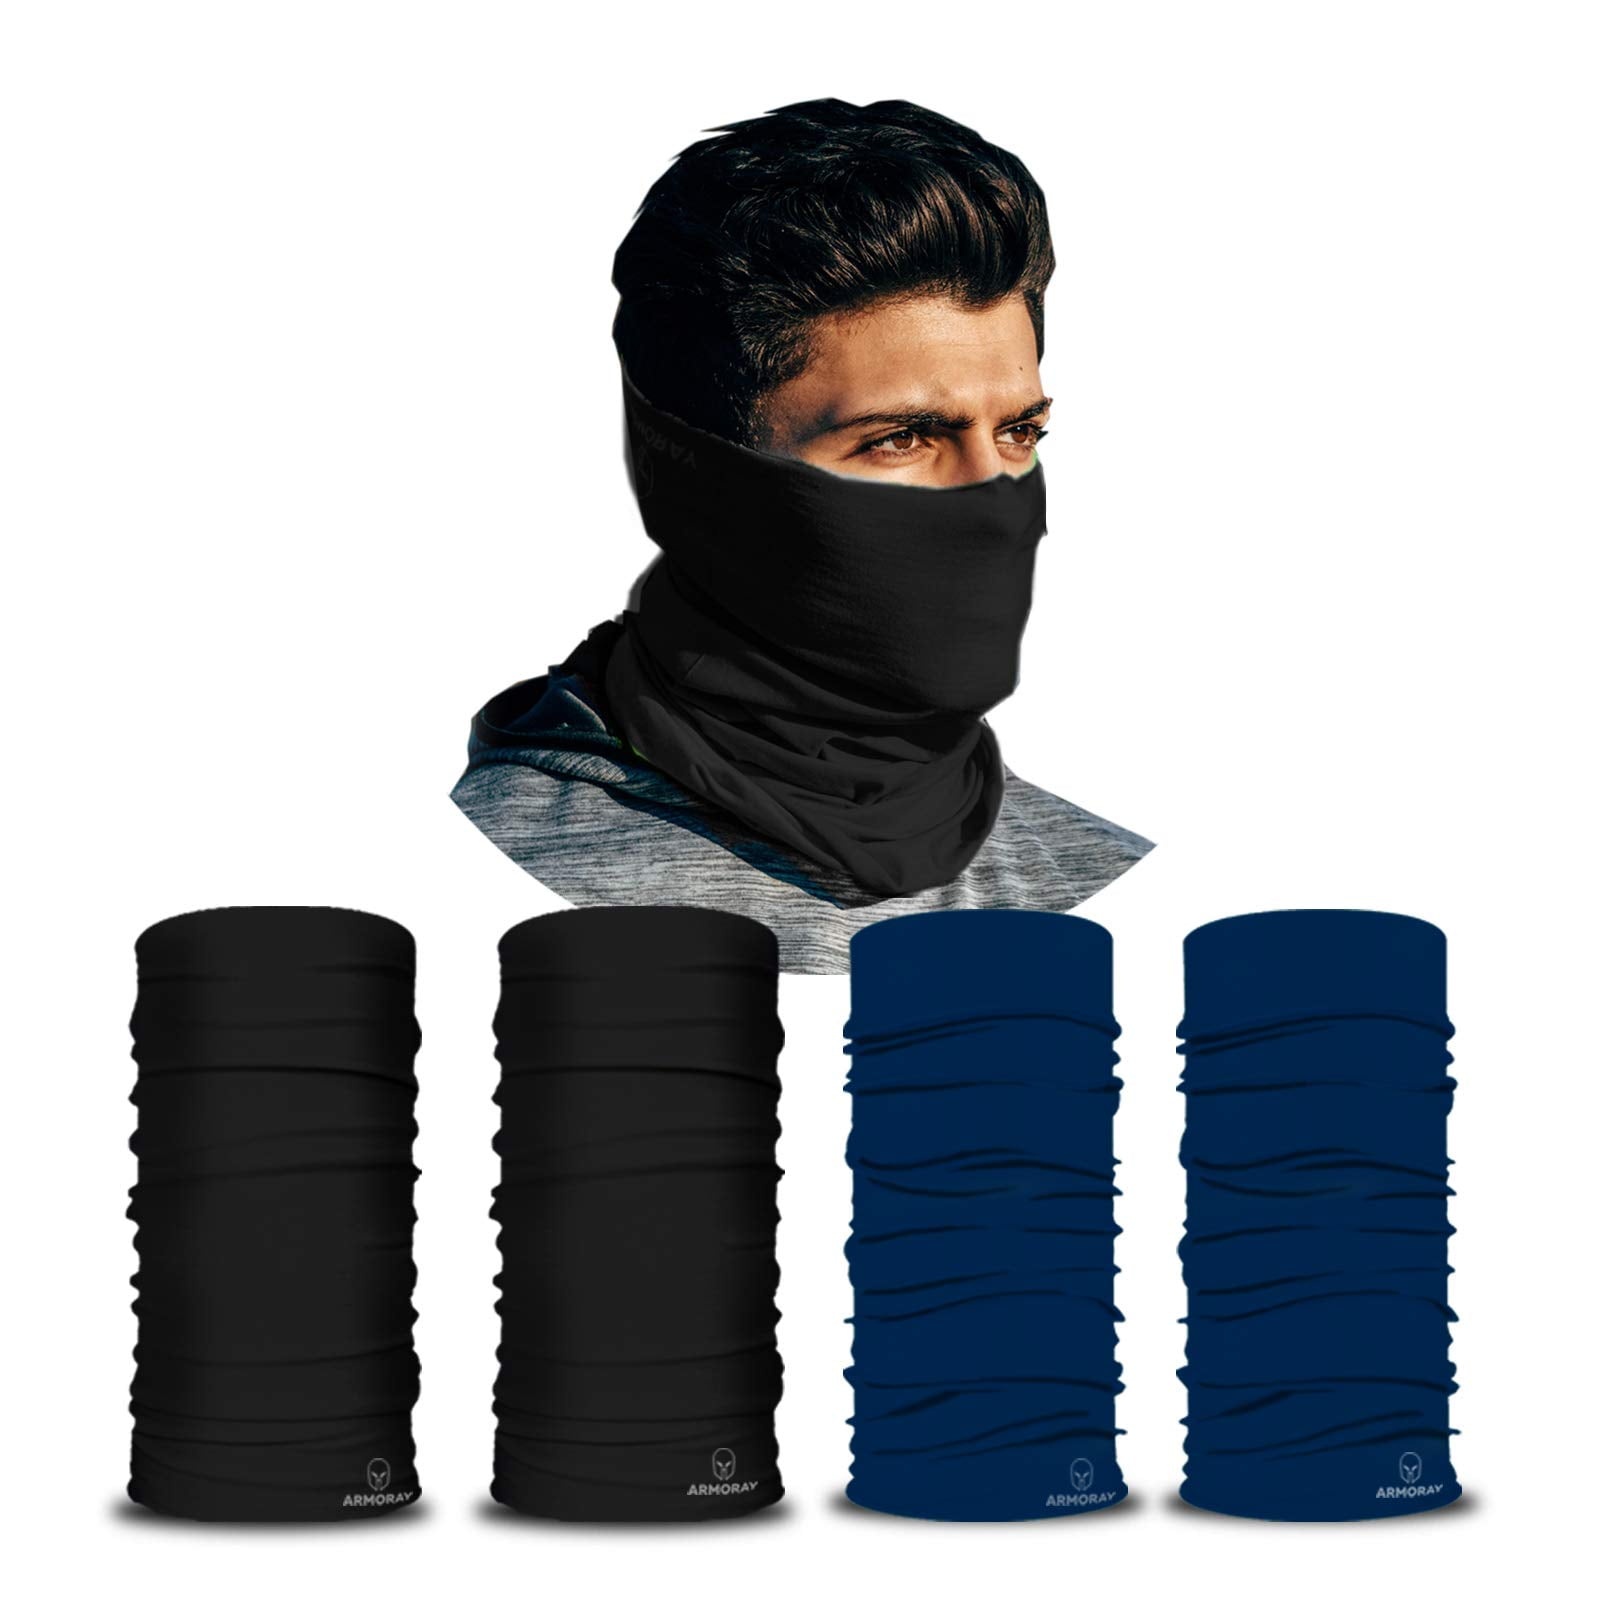 12Pcs Face Cover Bandanas for Dust Multi-purpose Washable Neck Gaiter with Filters for Men and Women Outdoors Cycling Sports 